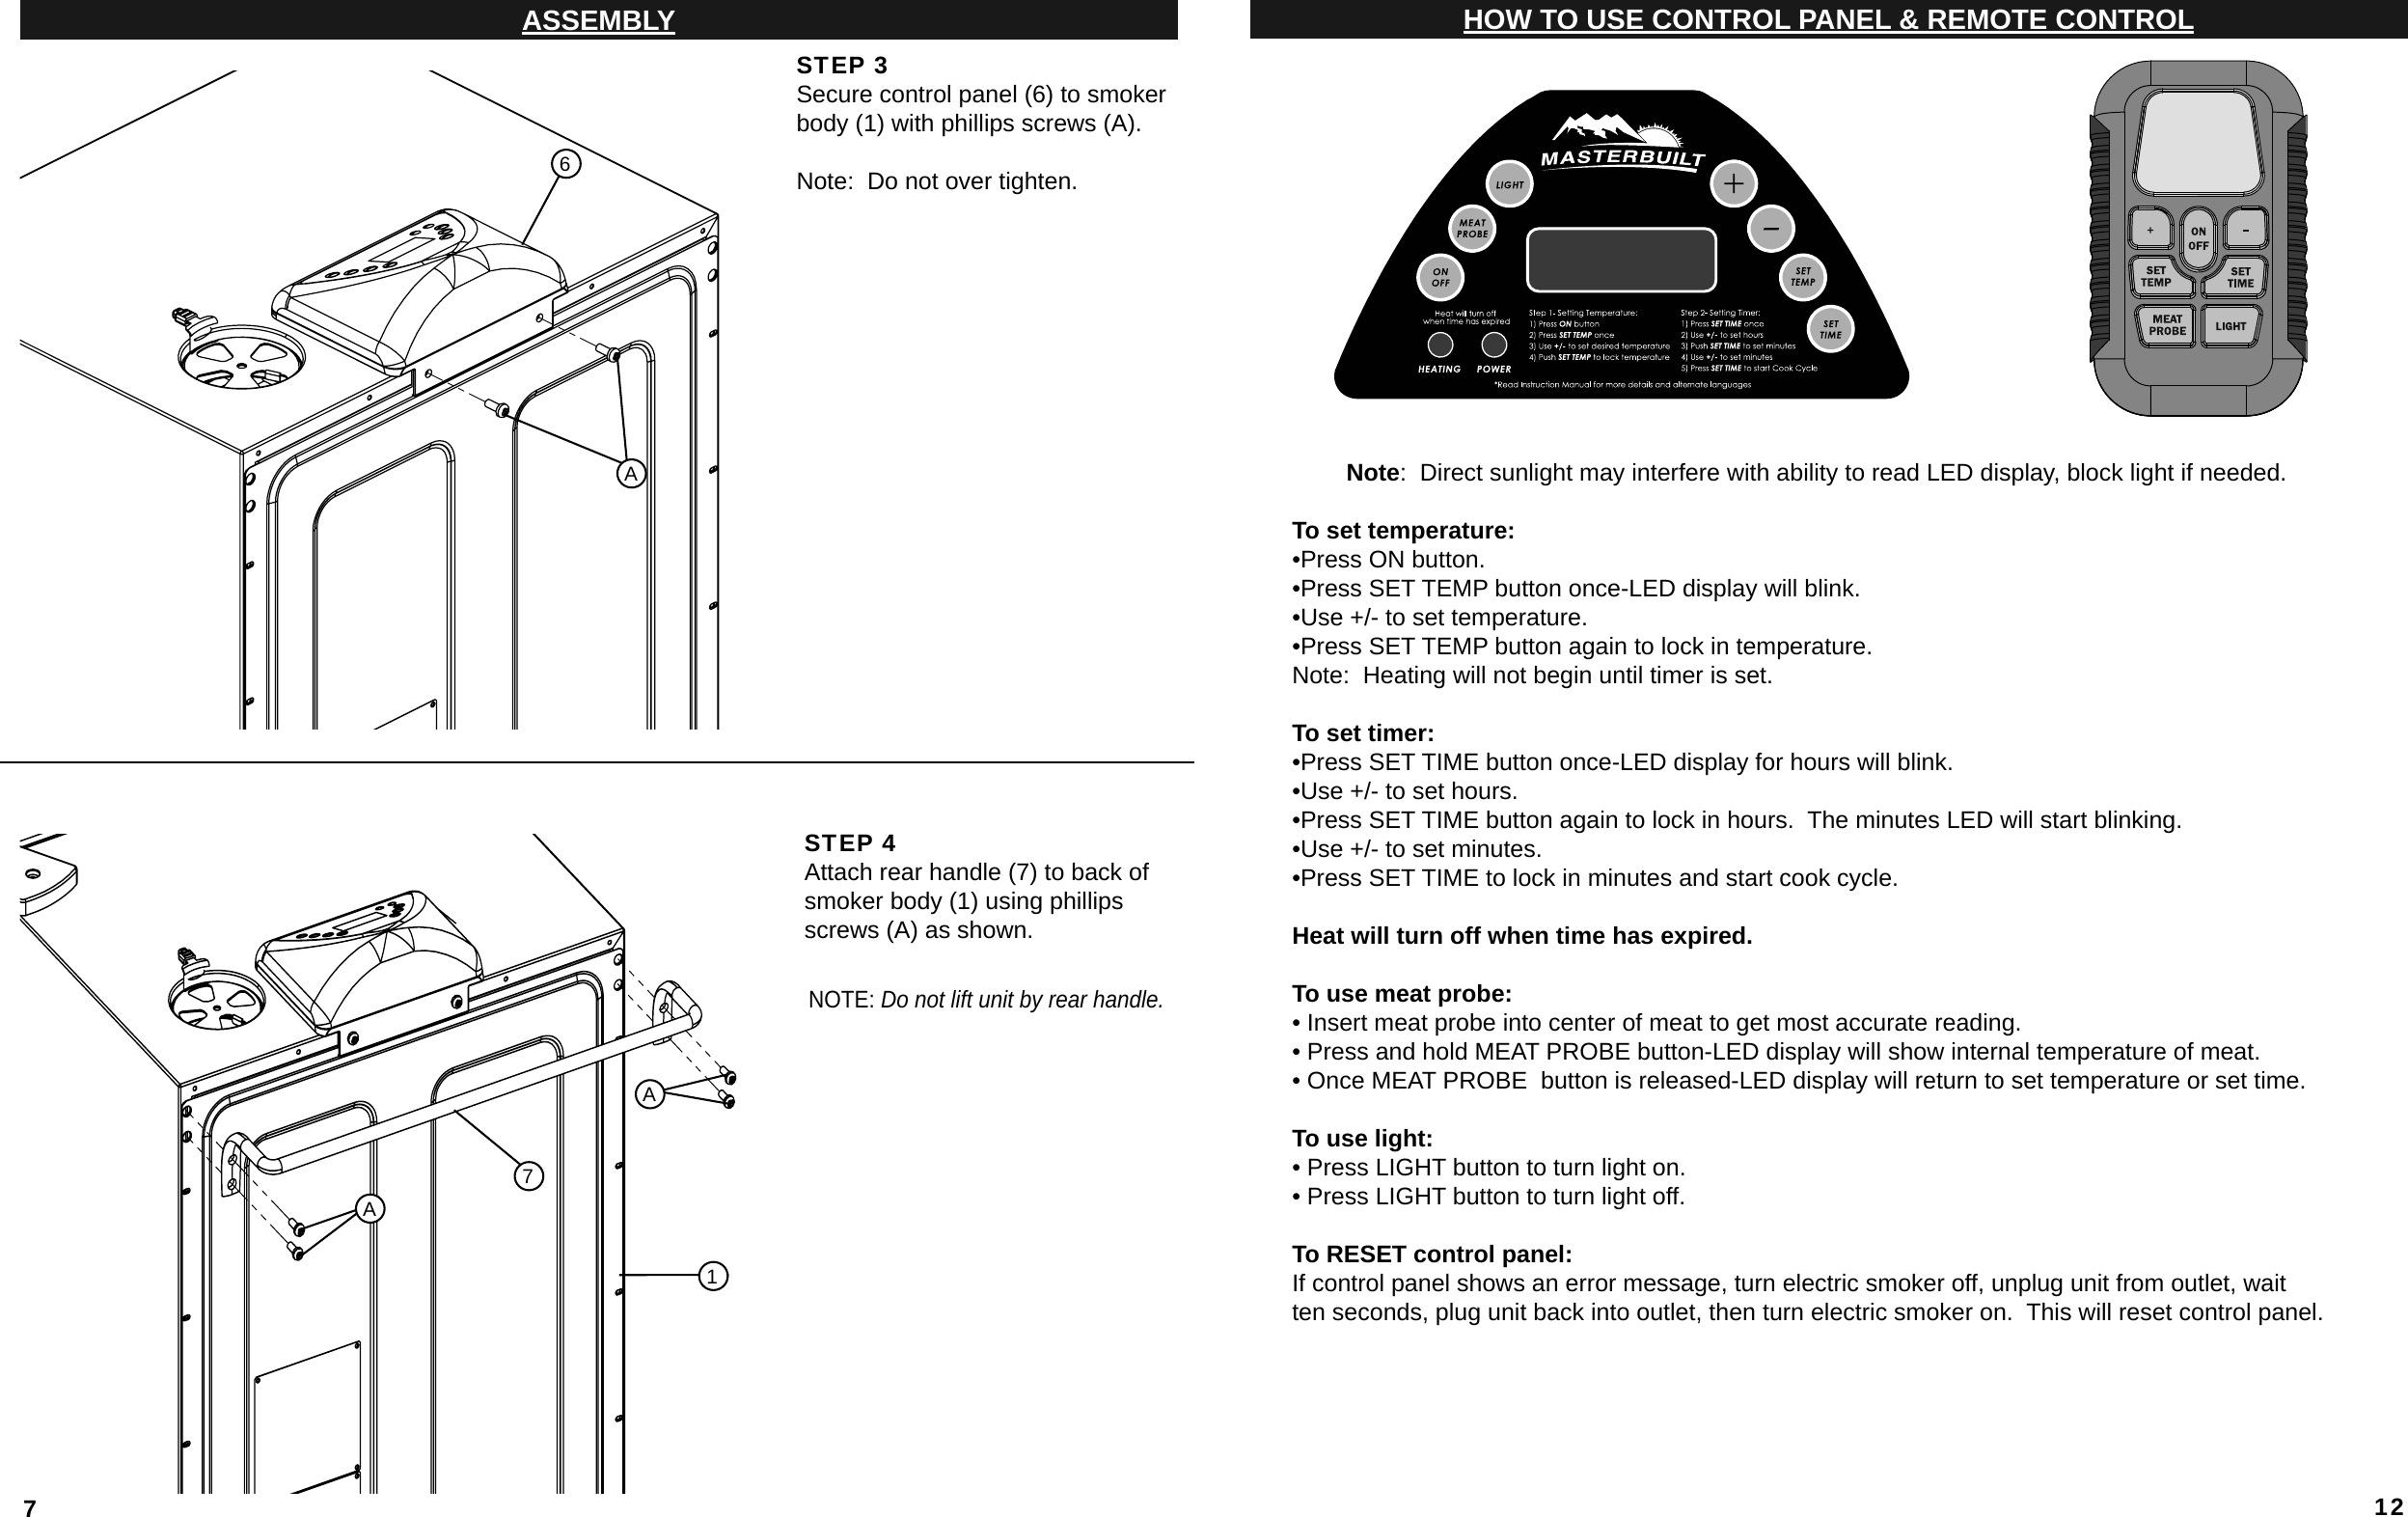 7ASSEMBLYSTEP 3Secure control panel (6) to smoker body (1) with phillips screws (A).Note:  Do not over tighten.STEP 4Attach rear handle (7) to back of smoker body (1) using phillips screws (A) as shown.NOTE: Do not lift unit by rear handle.6AAA1712HOW TO USE CONTROL PANEL &amp; REMOTE CONTROLNote:  Direct sunlight may interfere with ability to read LED display, block light if needed.To set temperature:•Press ON button.•Press SET TEMP button once-LED display will blink.•Use +/- to set temperature.•Press SET TEMP button again to lock in temperature.Note:  Heating will not begin until timer is set.To set timer:•Press SET TIME button once-LED display for hours will blink.•Use +/- to set hours.•Press SET TIME button again to lock in hours.  The minutes LED will start blinking.•Use +/- to set minutes.•Press SET TIME to lock in minutes and start cook cycle.Heat will turn off when time has expired.To use meat probe:• Insert meat probe into center of meat to get most accurate reading. • Press and hold MEAT PROBE button-LED display will show internal temperature of meat. • Once MEAT PROBE  button is released-LED display will return to set temperature or set time.To use light:• Press LIGHT button to turn light on.• Press LIGHT button to turn light off.To RESET control panel:If control panel shows an error message, turn electric smoker off, unplug unit from outlet, waitten seconds, plug unit back into outlet, then turn electric smoker on.  This will reset control panel. 